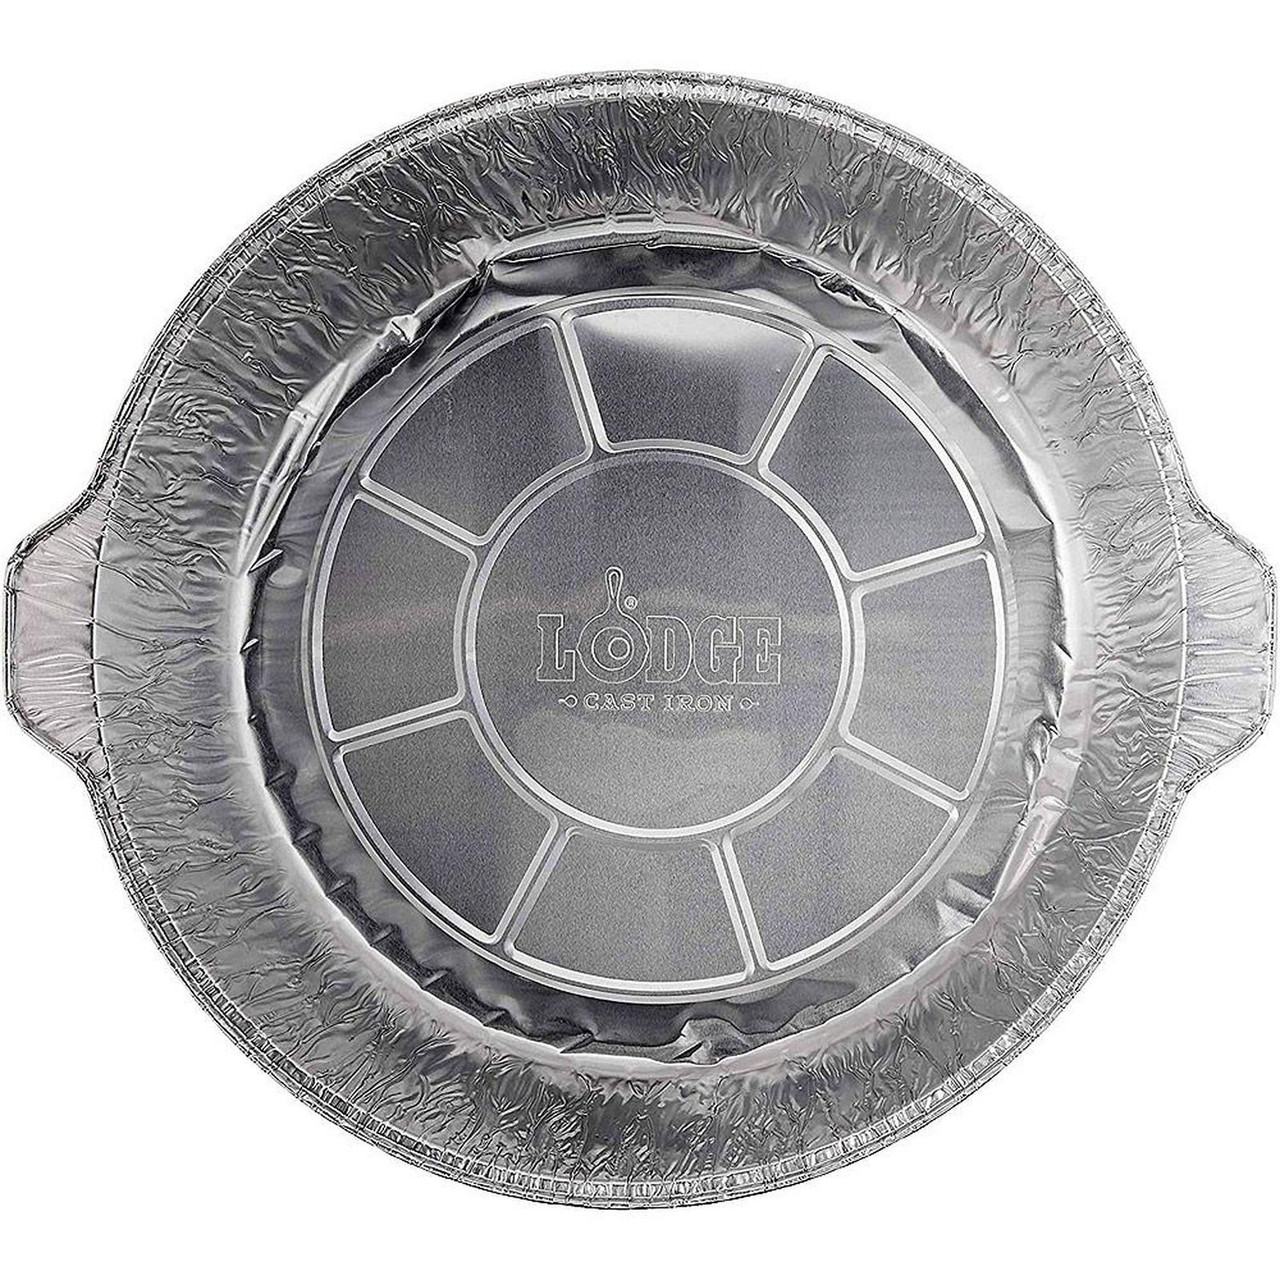 Lodge 12 Aluminum Foil Camp Dutch Oven Liners, Pack of 12 